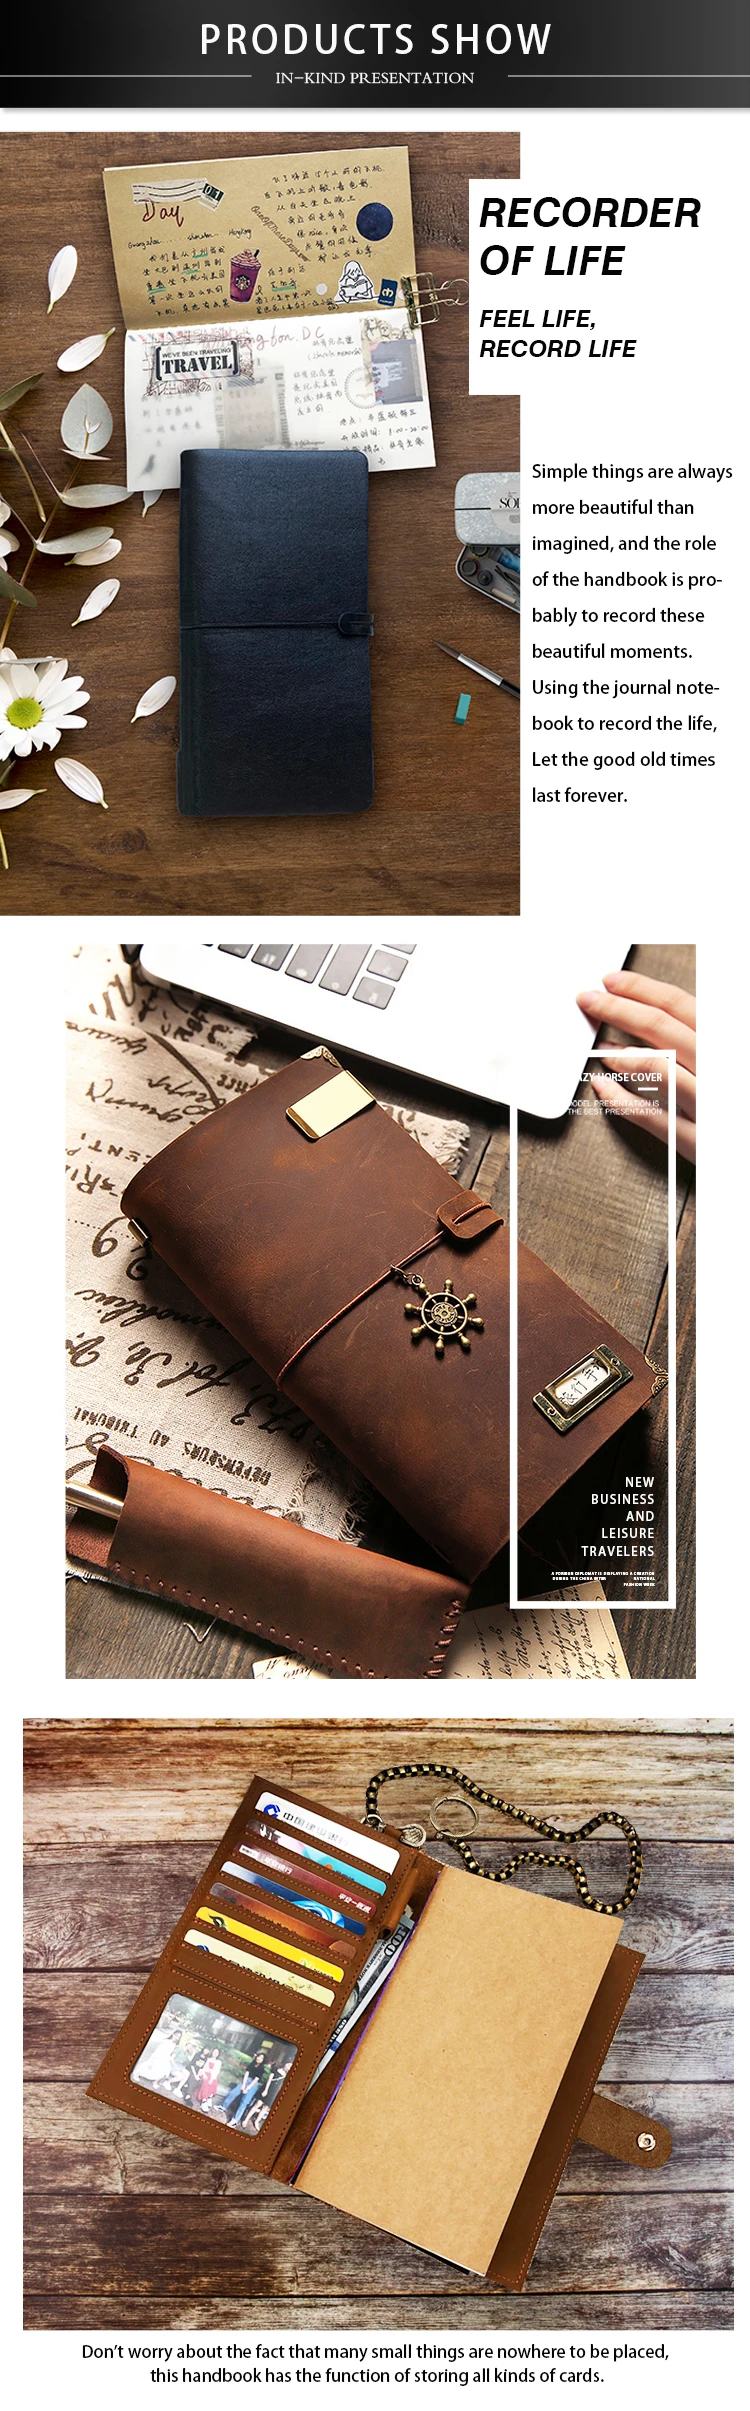 Custom Handmade Cover Leather Notebook Diary Genuine Real Leather Planner Journal Vintage Travel Notebook with Wallet Pocket